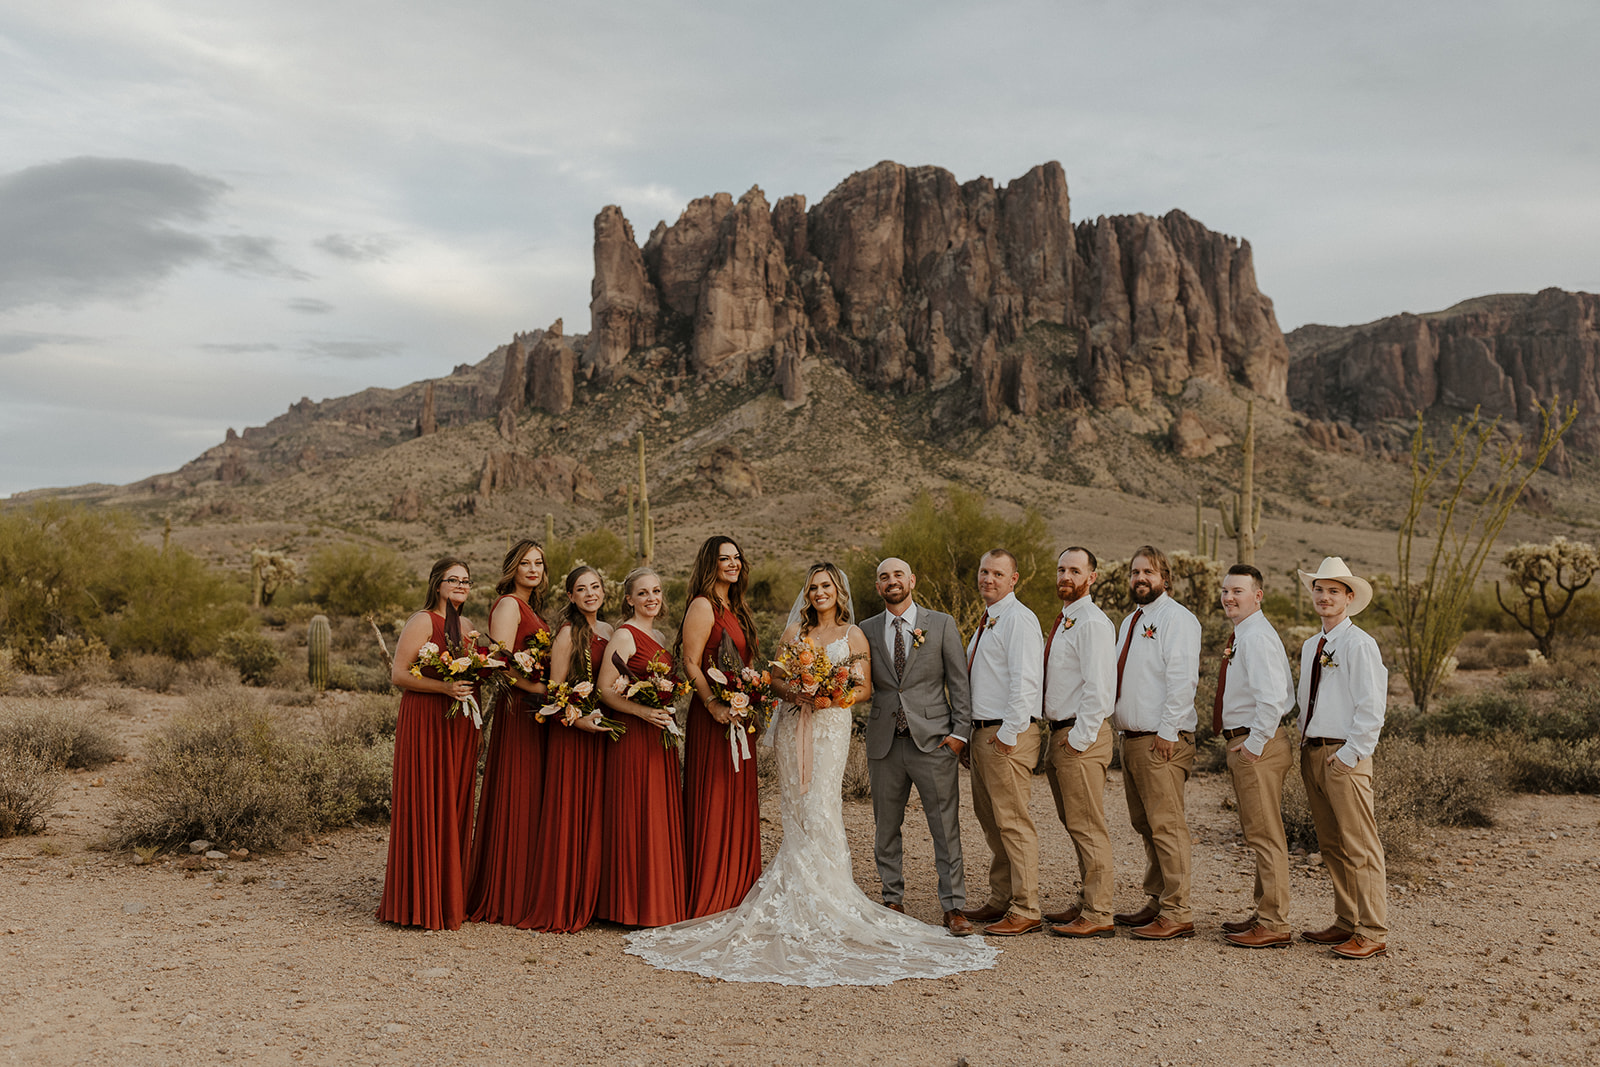 wedding party poses together with stunning Arizona nature in the background